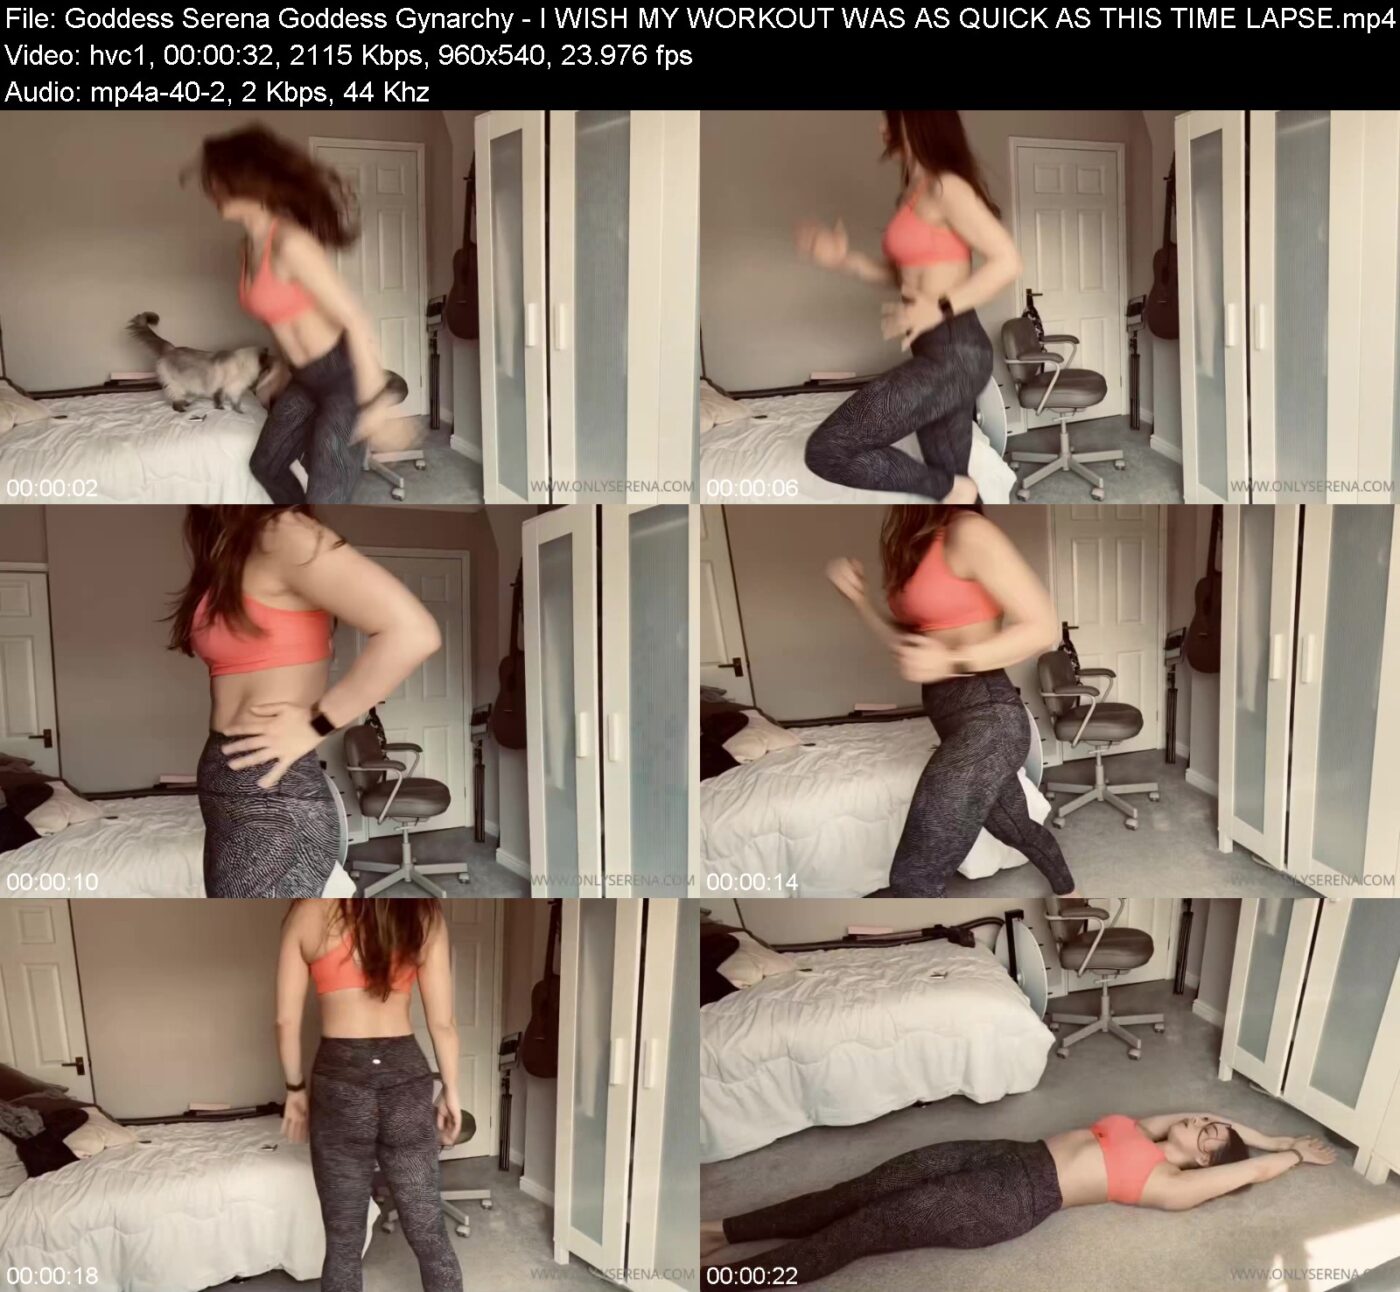 Goddess Serena Goddess Gynarchy - I WISH MY WORKOUT WAS AS QUICK AS THIS TIME LAPSE